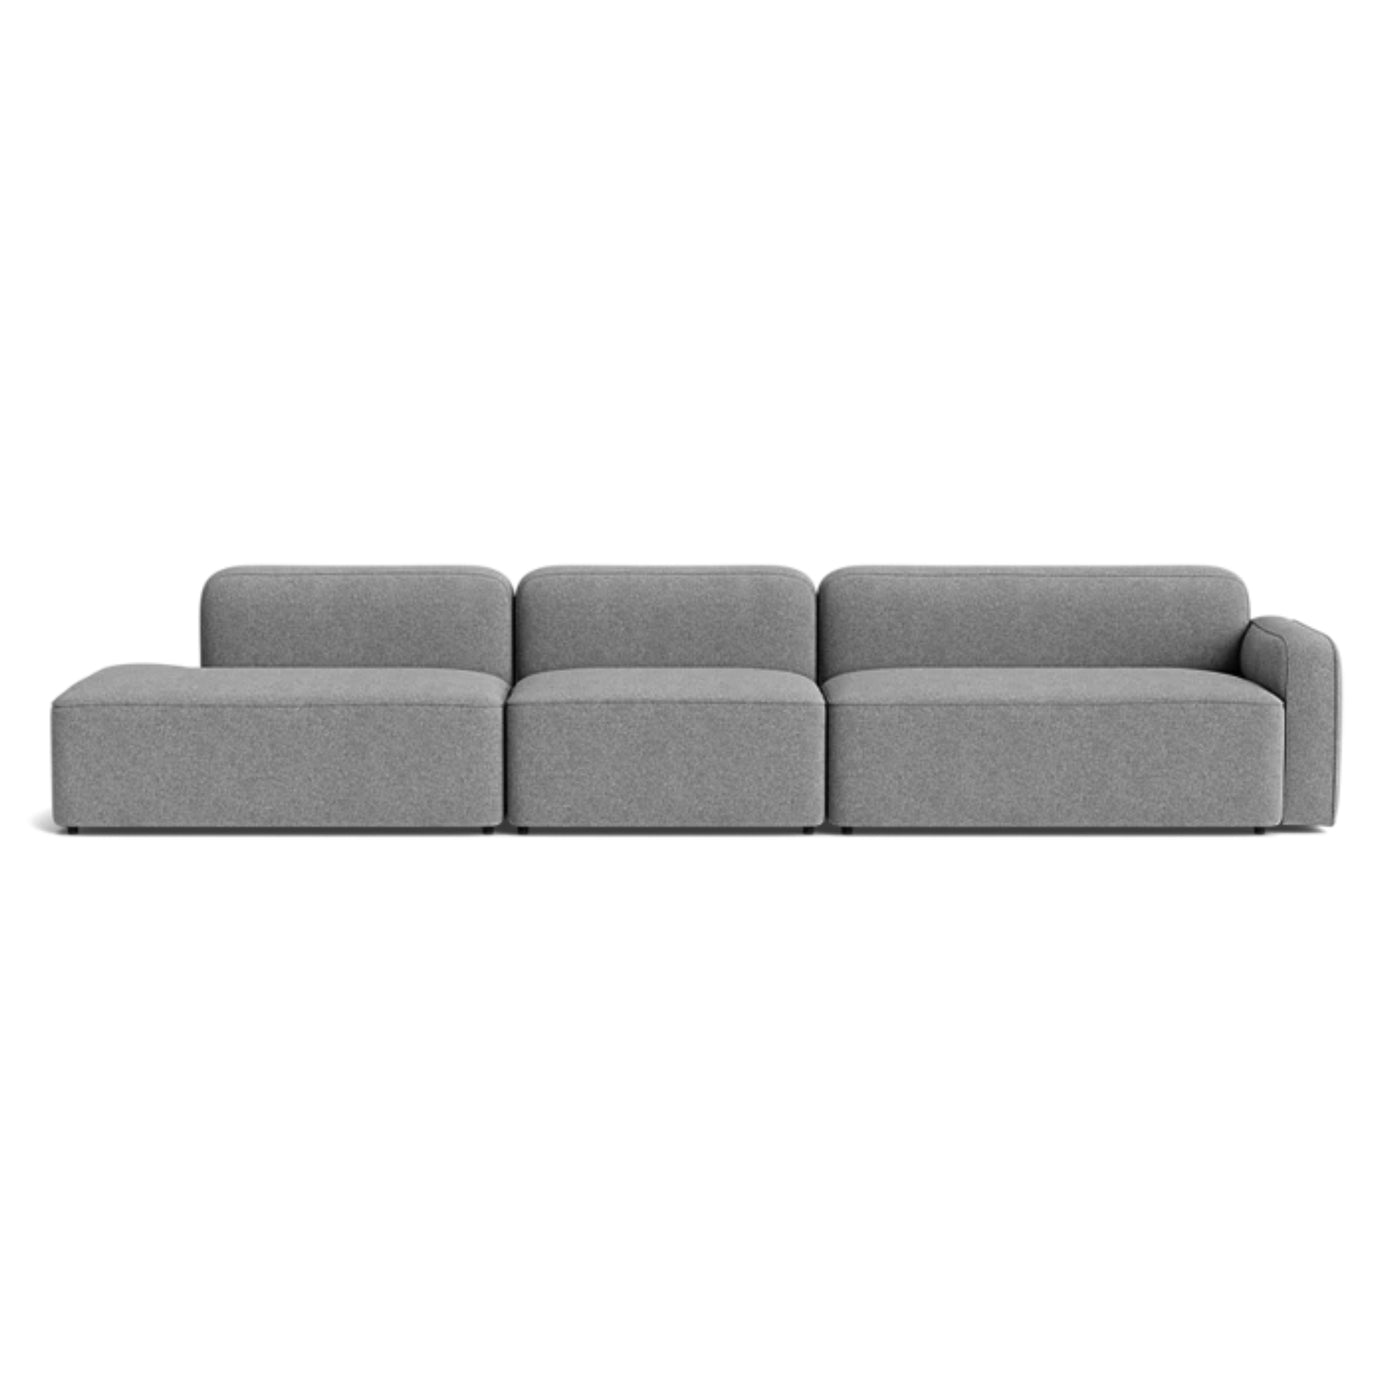 Normann Copenhagen Rope 3 Seater Modular Sofa. Made to order at someday designs. #colour_hallingdal-166